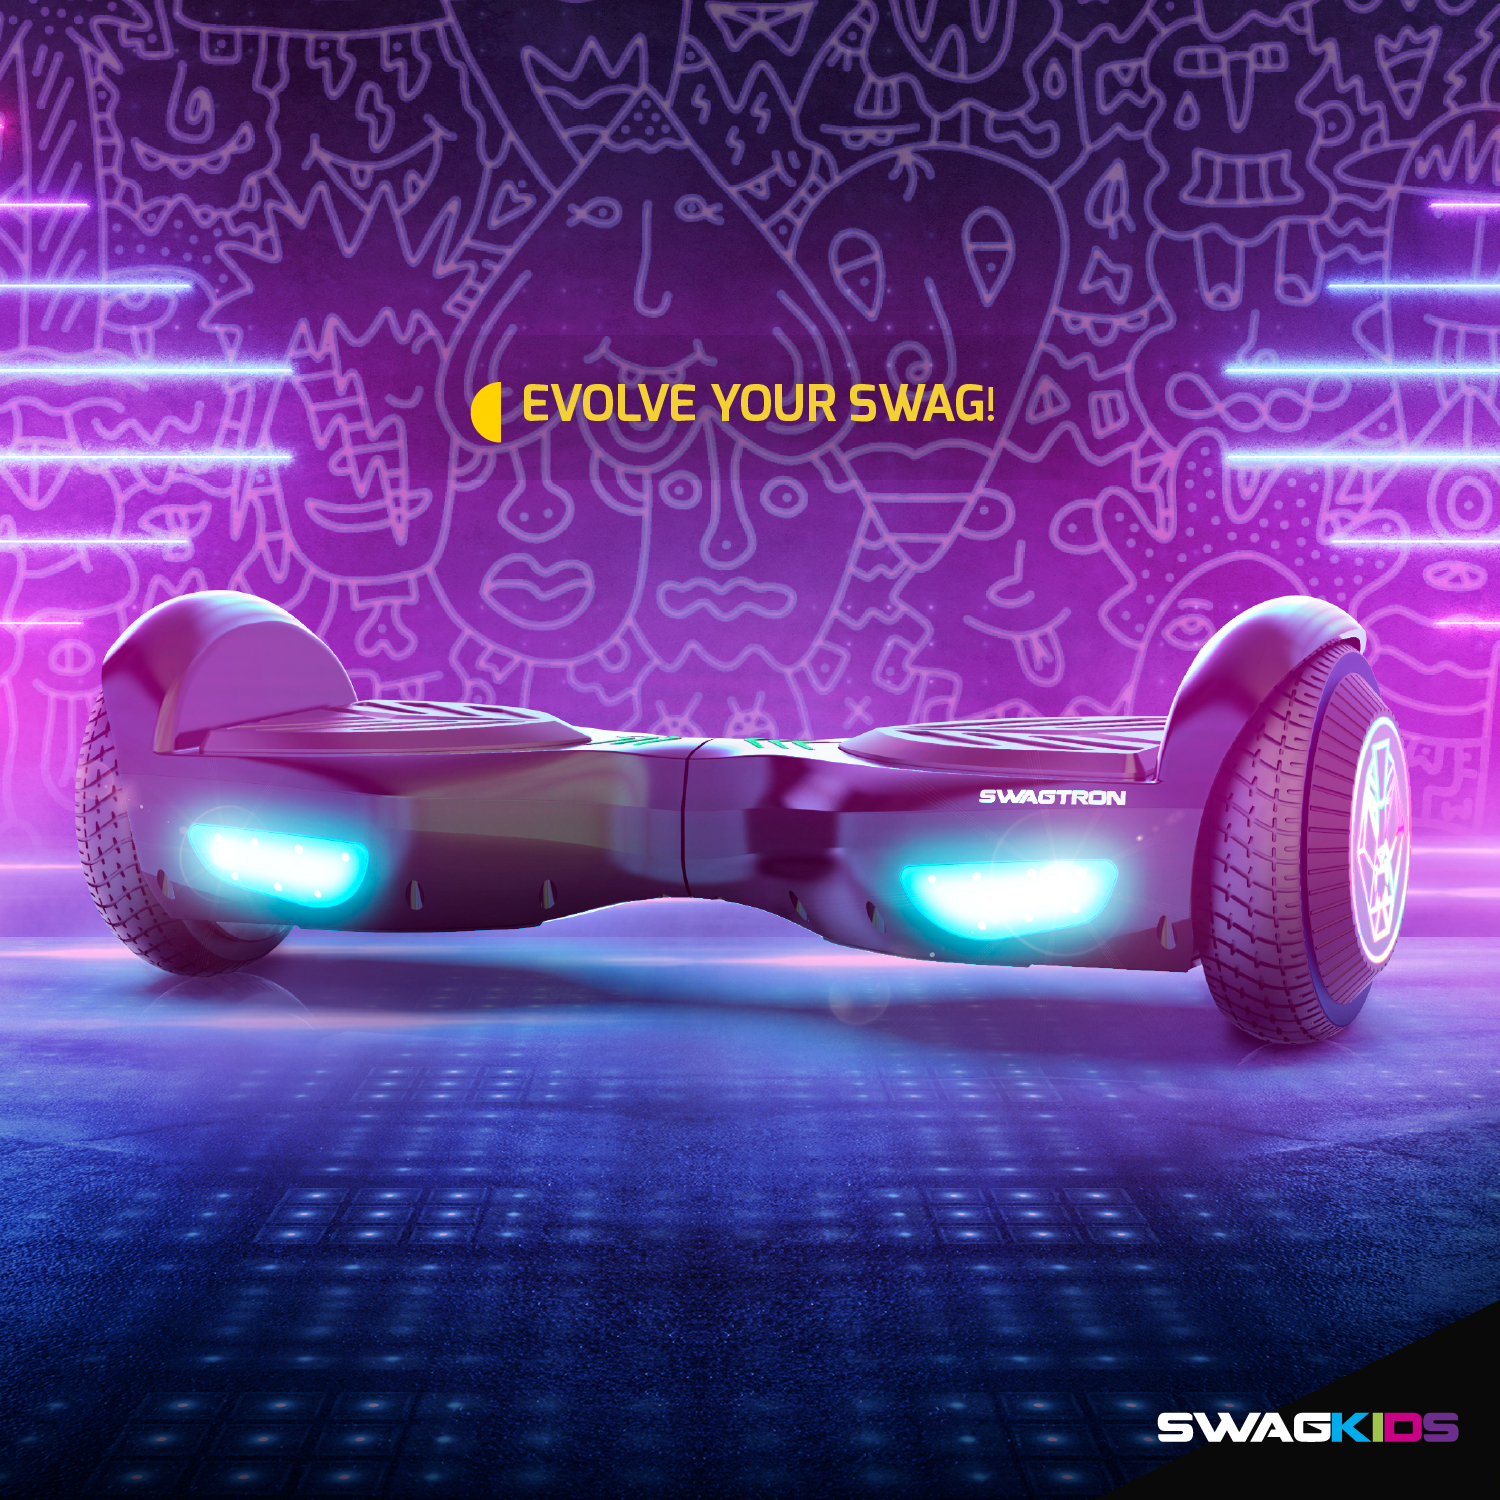 Swagtron Swag BOARD EVO V2 Hoverboard with Light-Up Wheels & Balance Assist, Exclusive UL-Compliant Life Po™ Battery Tech - image 3 of 8